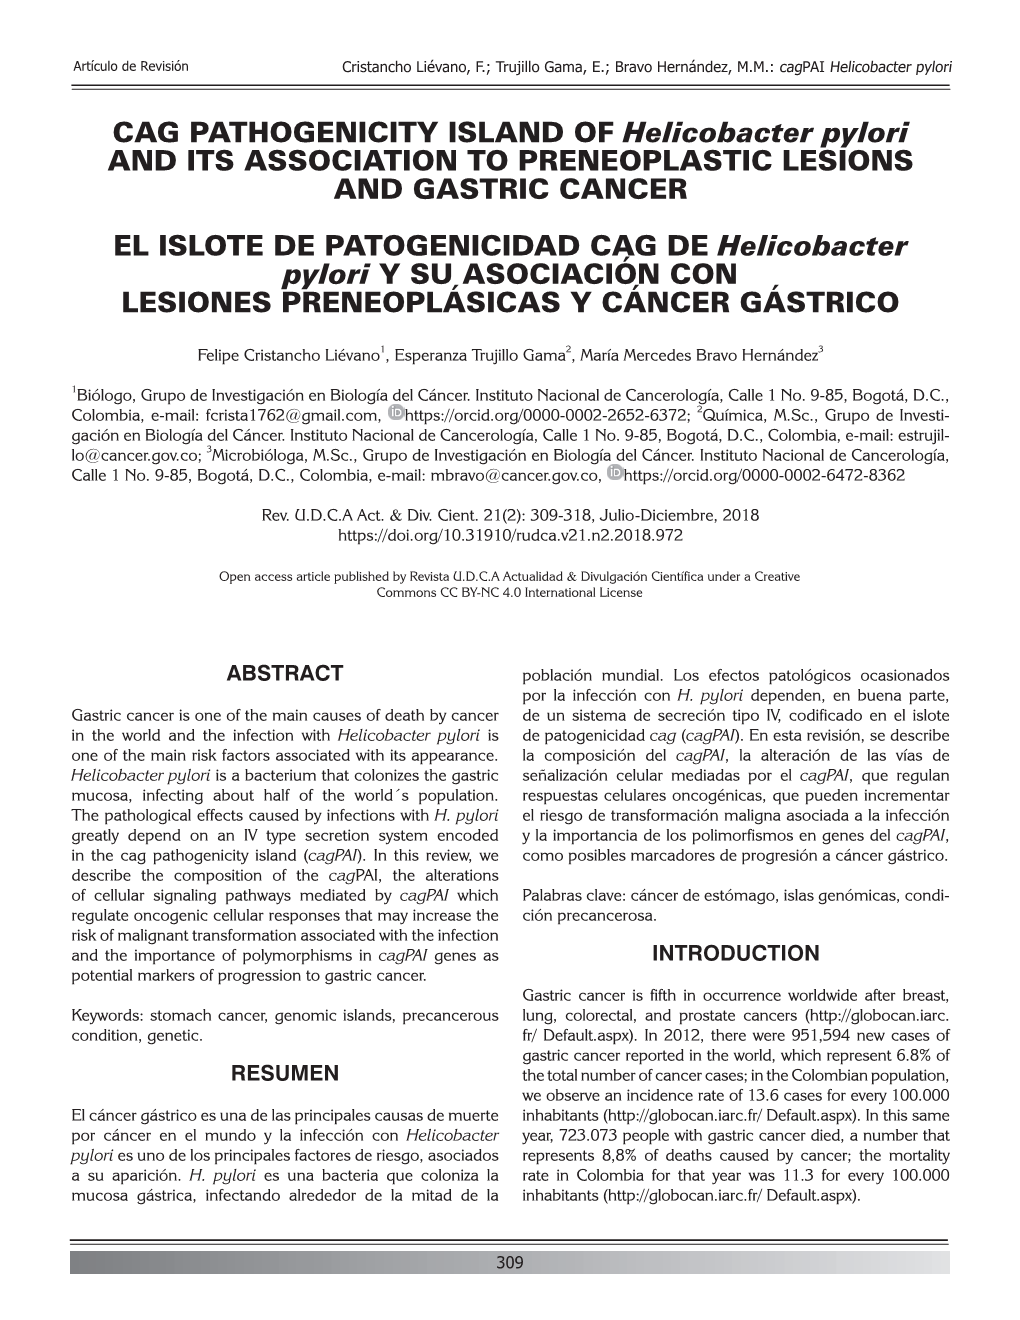 CAG PATHOGENICITY ISLAND of Helicobacter Pylori and ITS ASSOCIATION to PRENEOPLASTIC LESIONS and GASTRIC CANCER